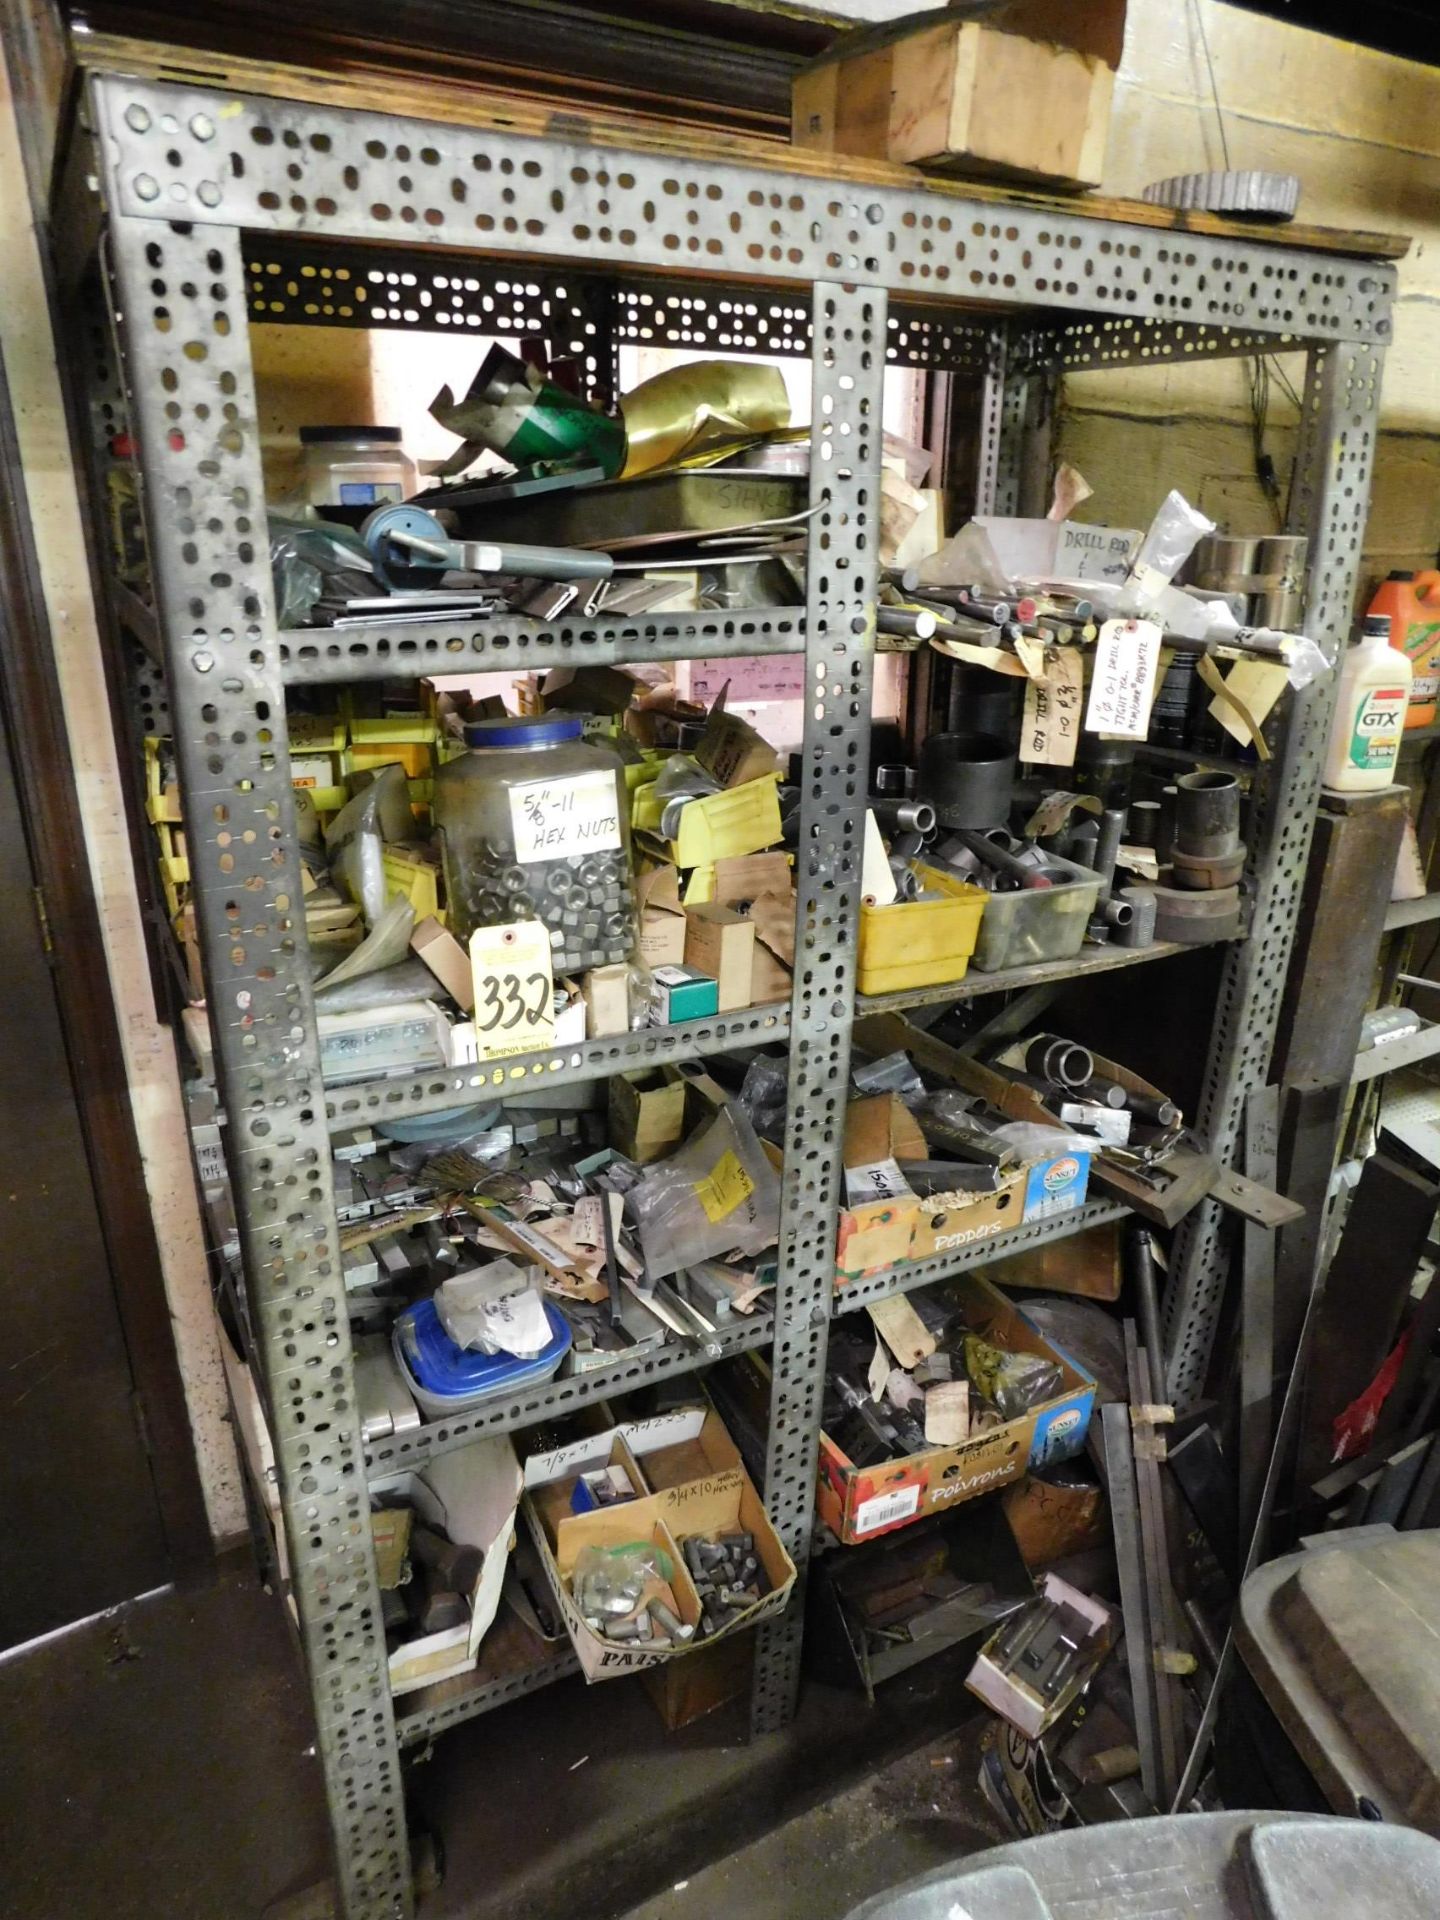 Shelving and Contents of Miscellaneous Hardware